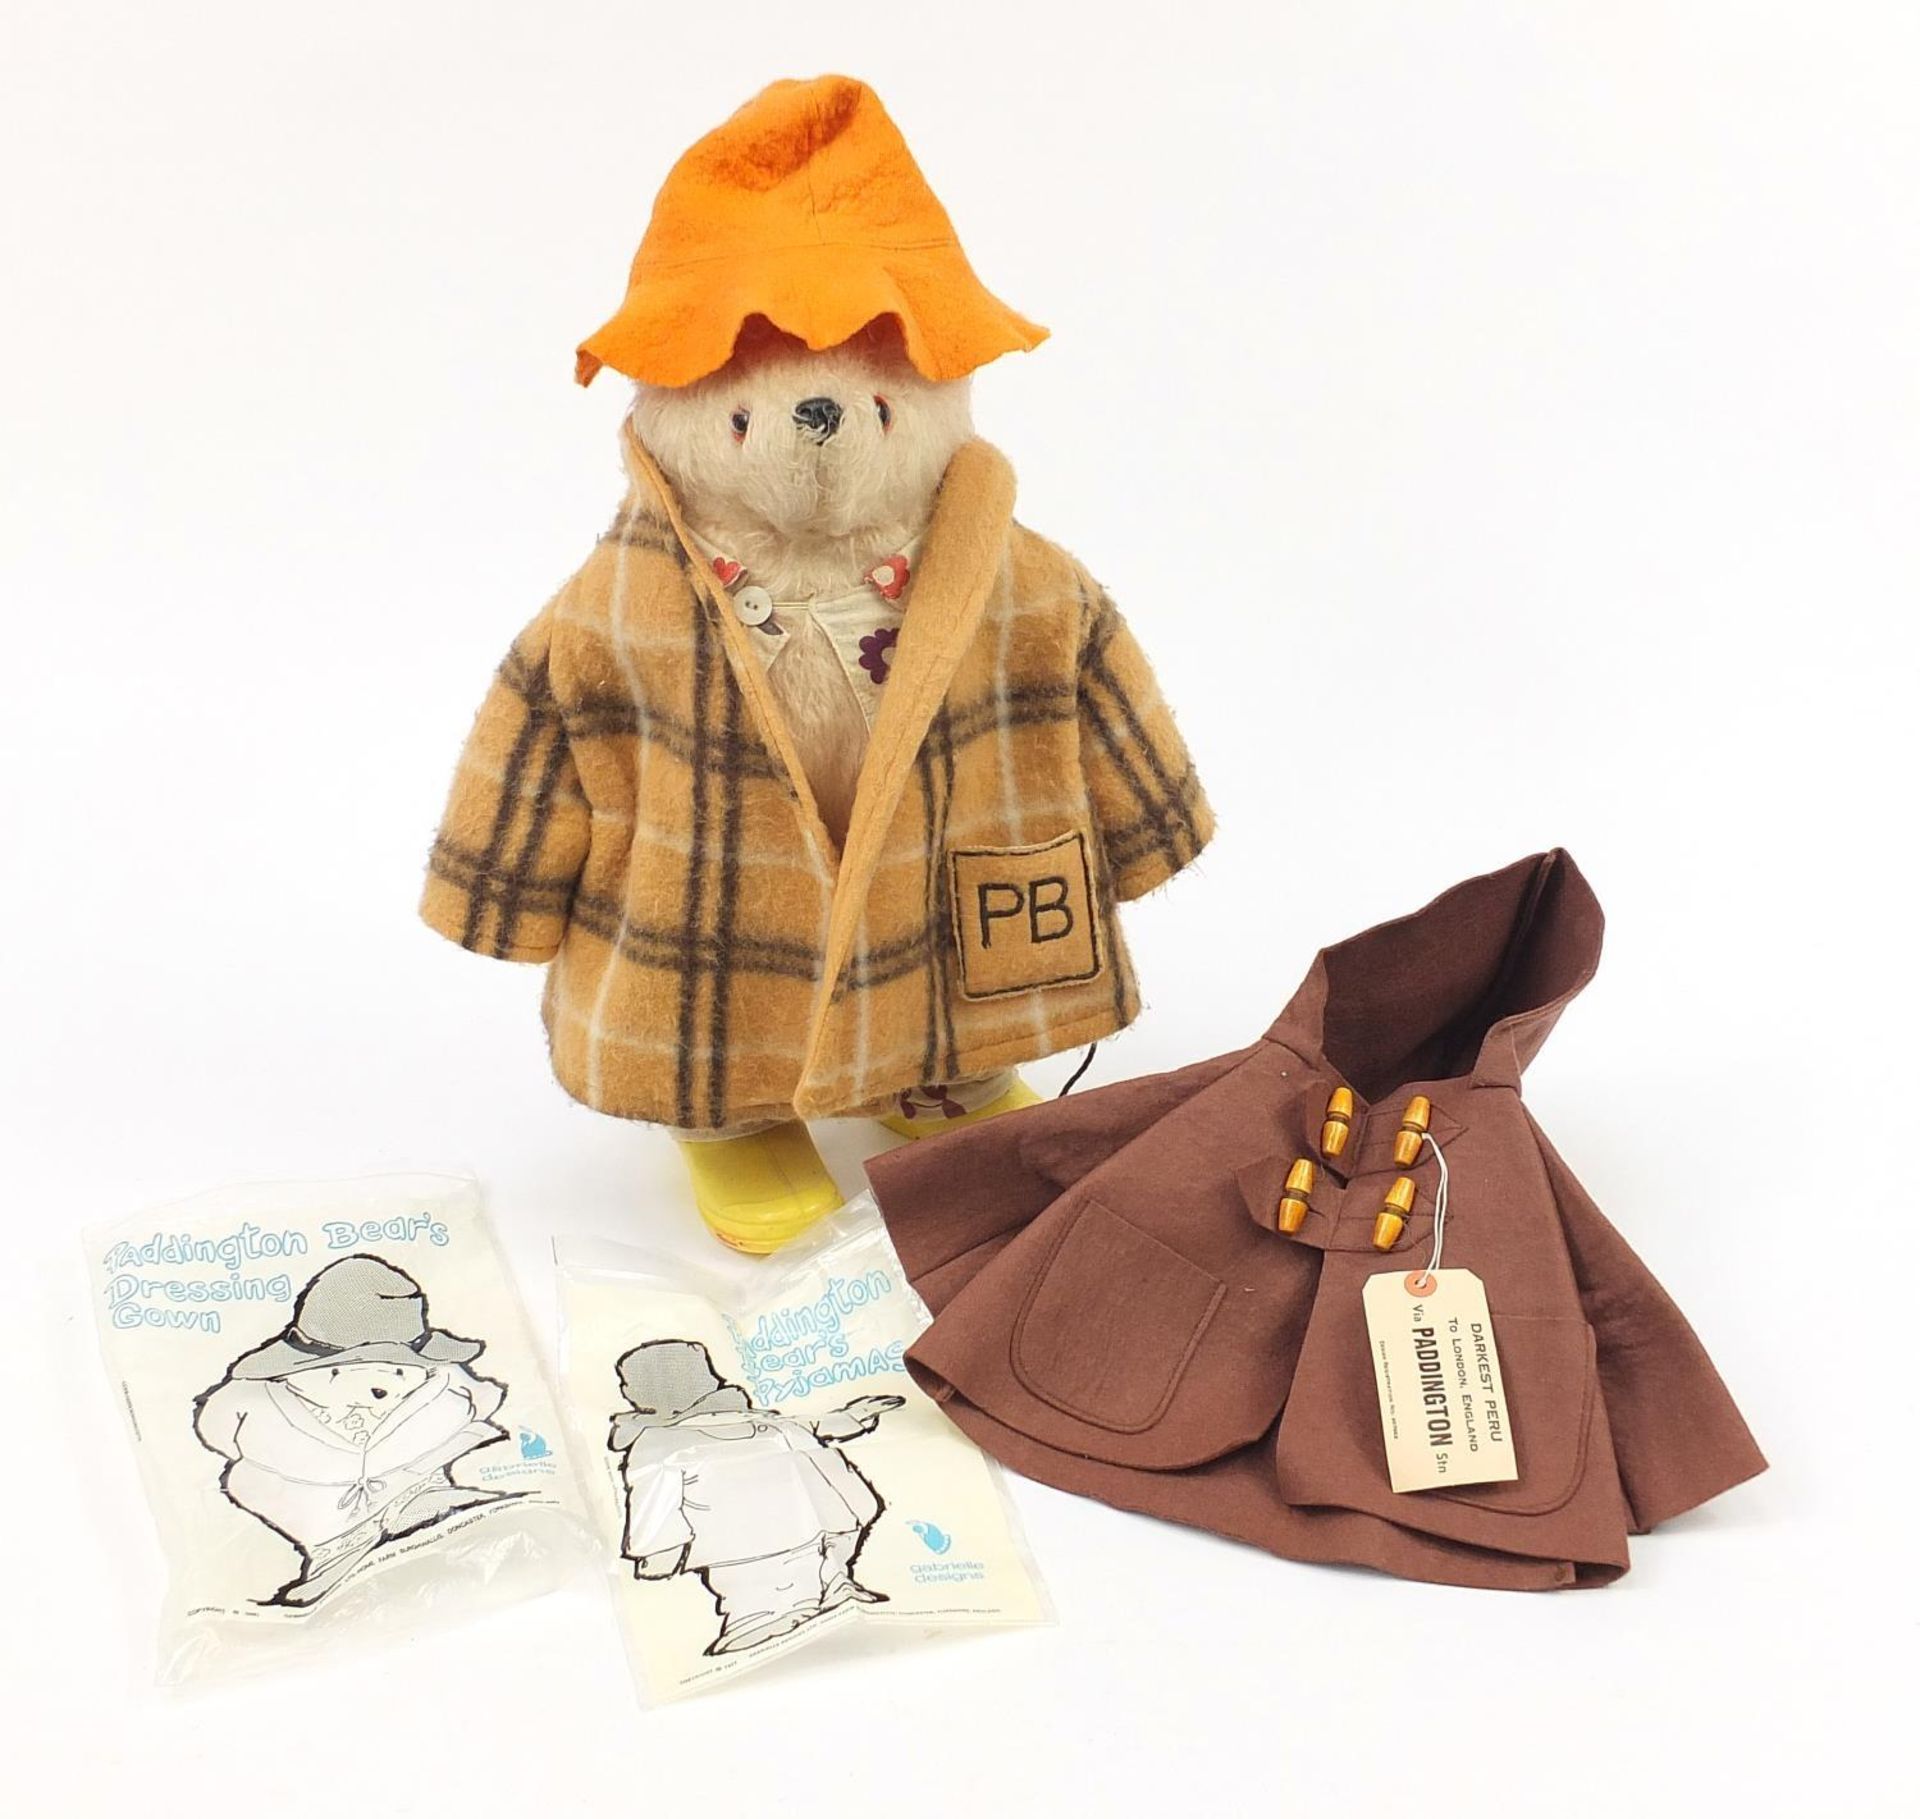 Vintage Gabrielle Design Paddington bear with yellow Wellington boots with spare clothing, 51cm high